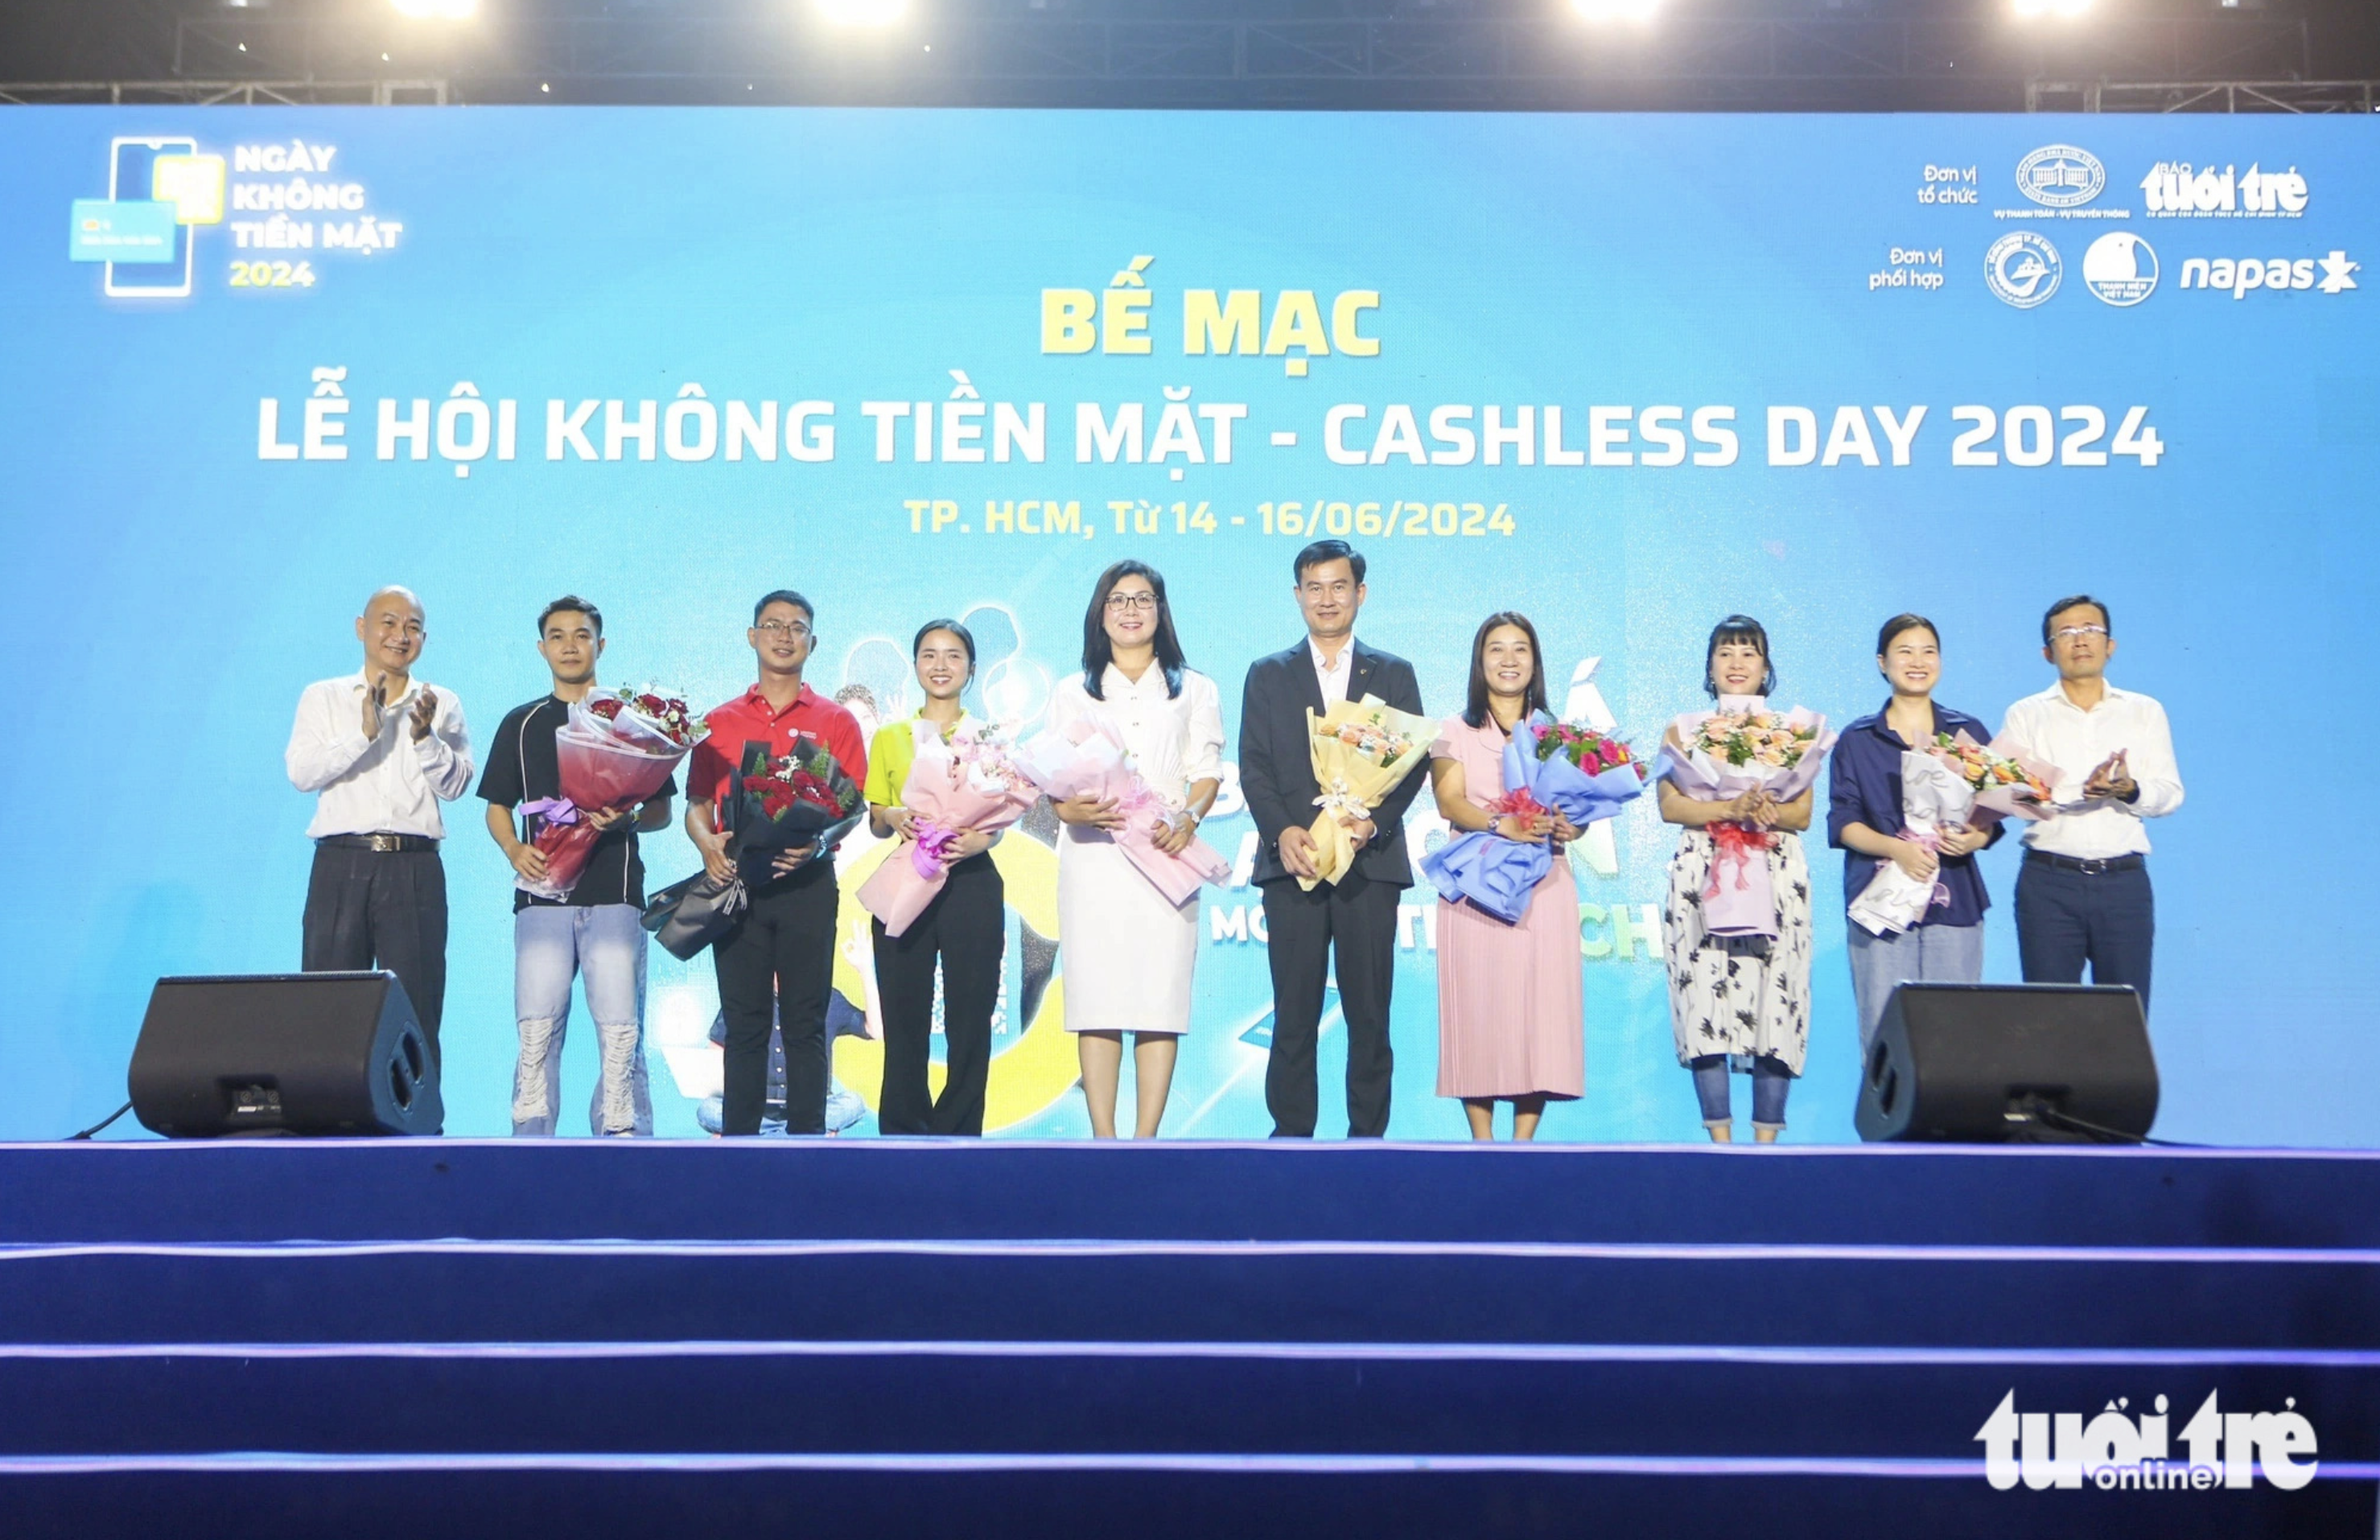 The organization board gives flowers to the representatives of some enterprises in association with the festival. Photo: Phuong Quyen / Tuoi Tre